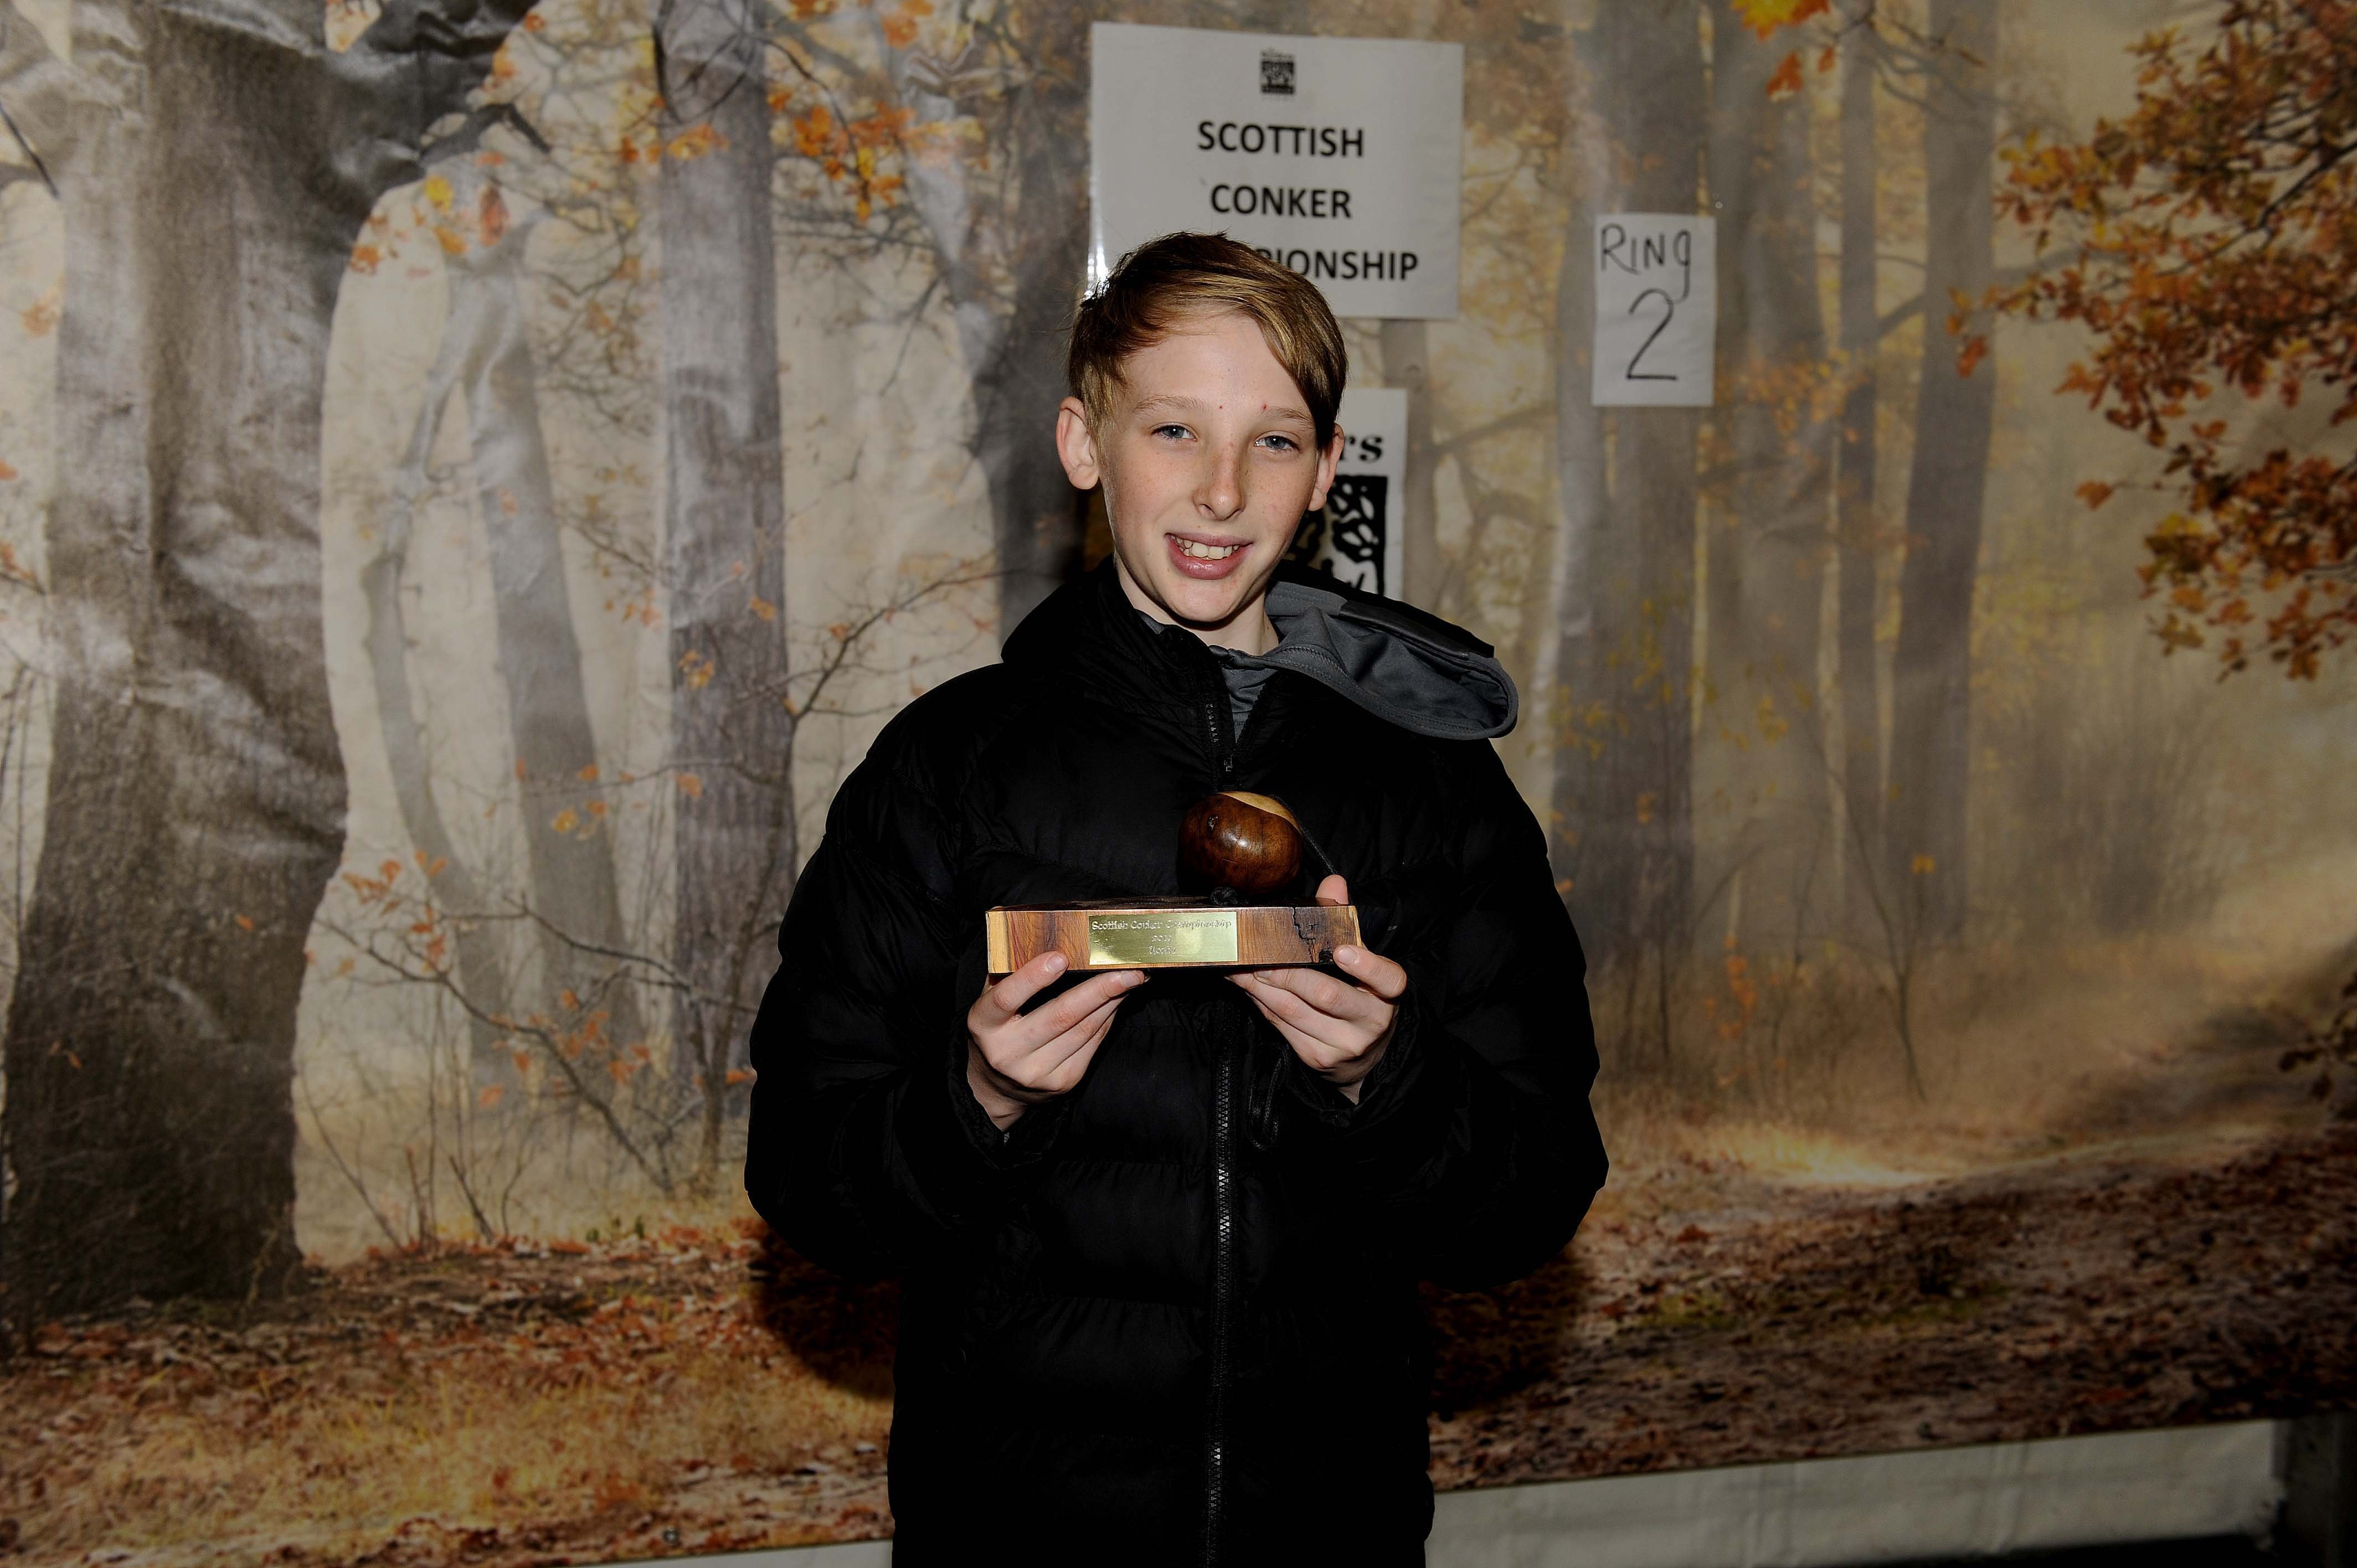 Craig Donnan 12-17 age group winner  at the Tweed Valley Forest Festival in Peebles.